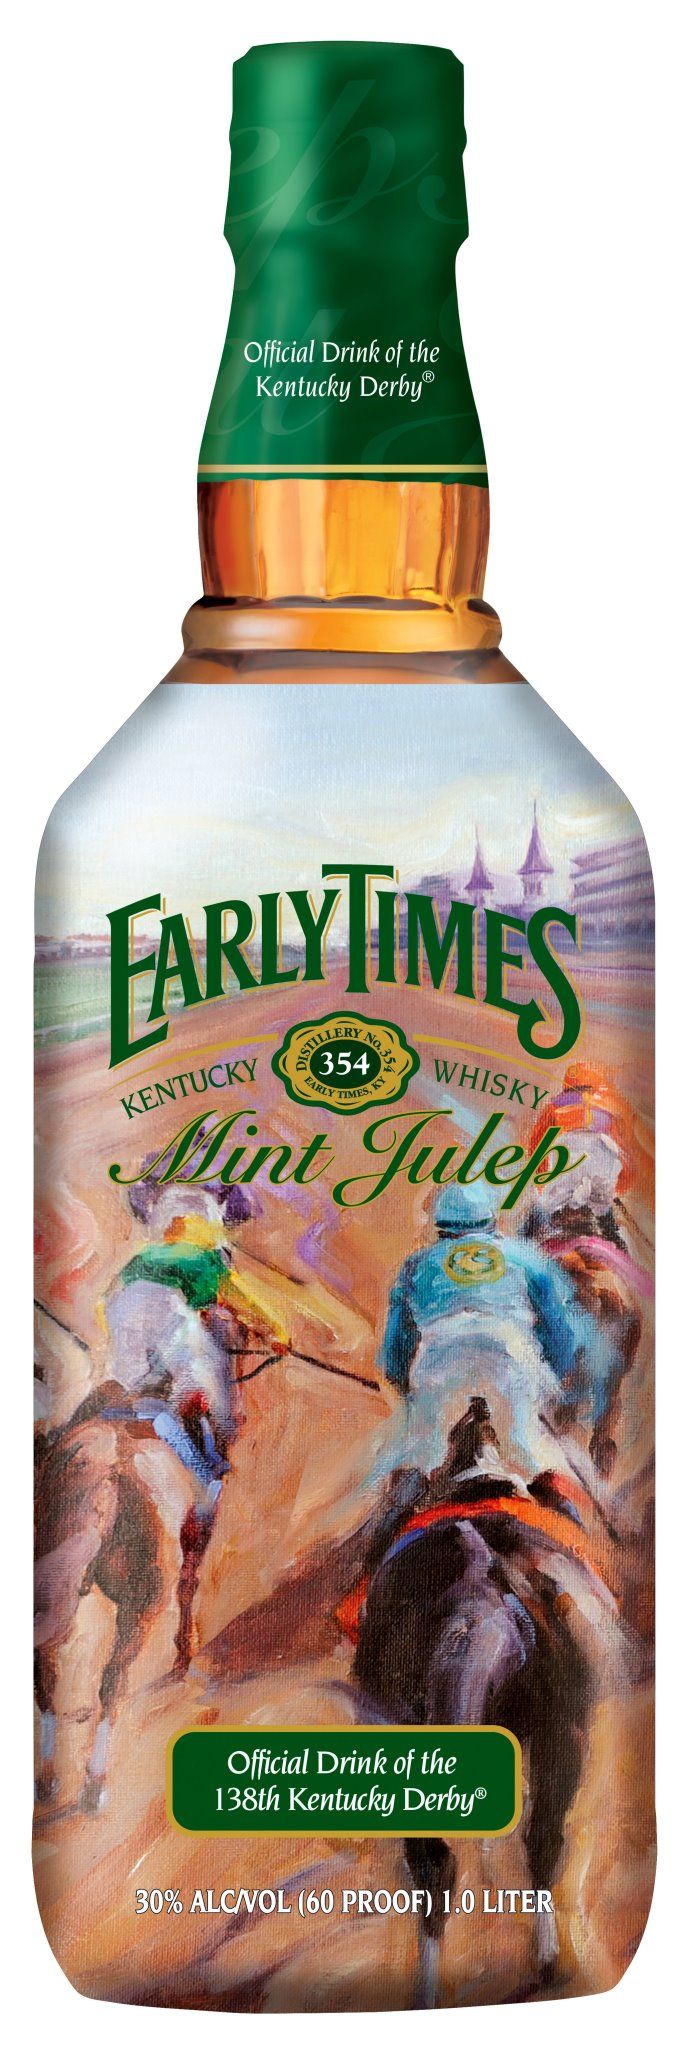 Early Times Mint Julep 138th Kentucky Derby Whisky | 1L